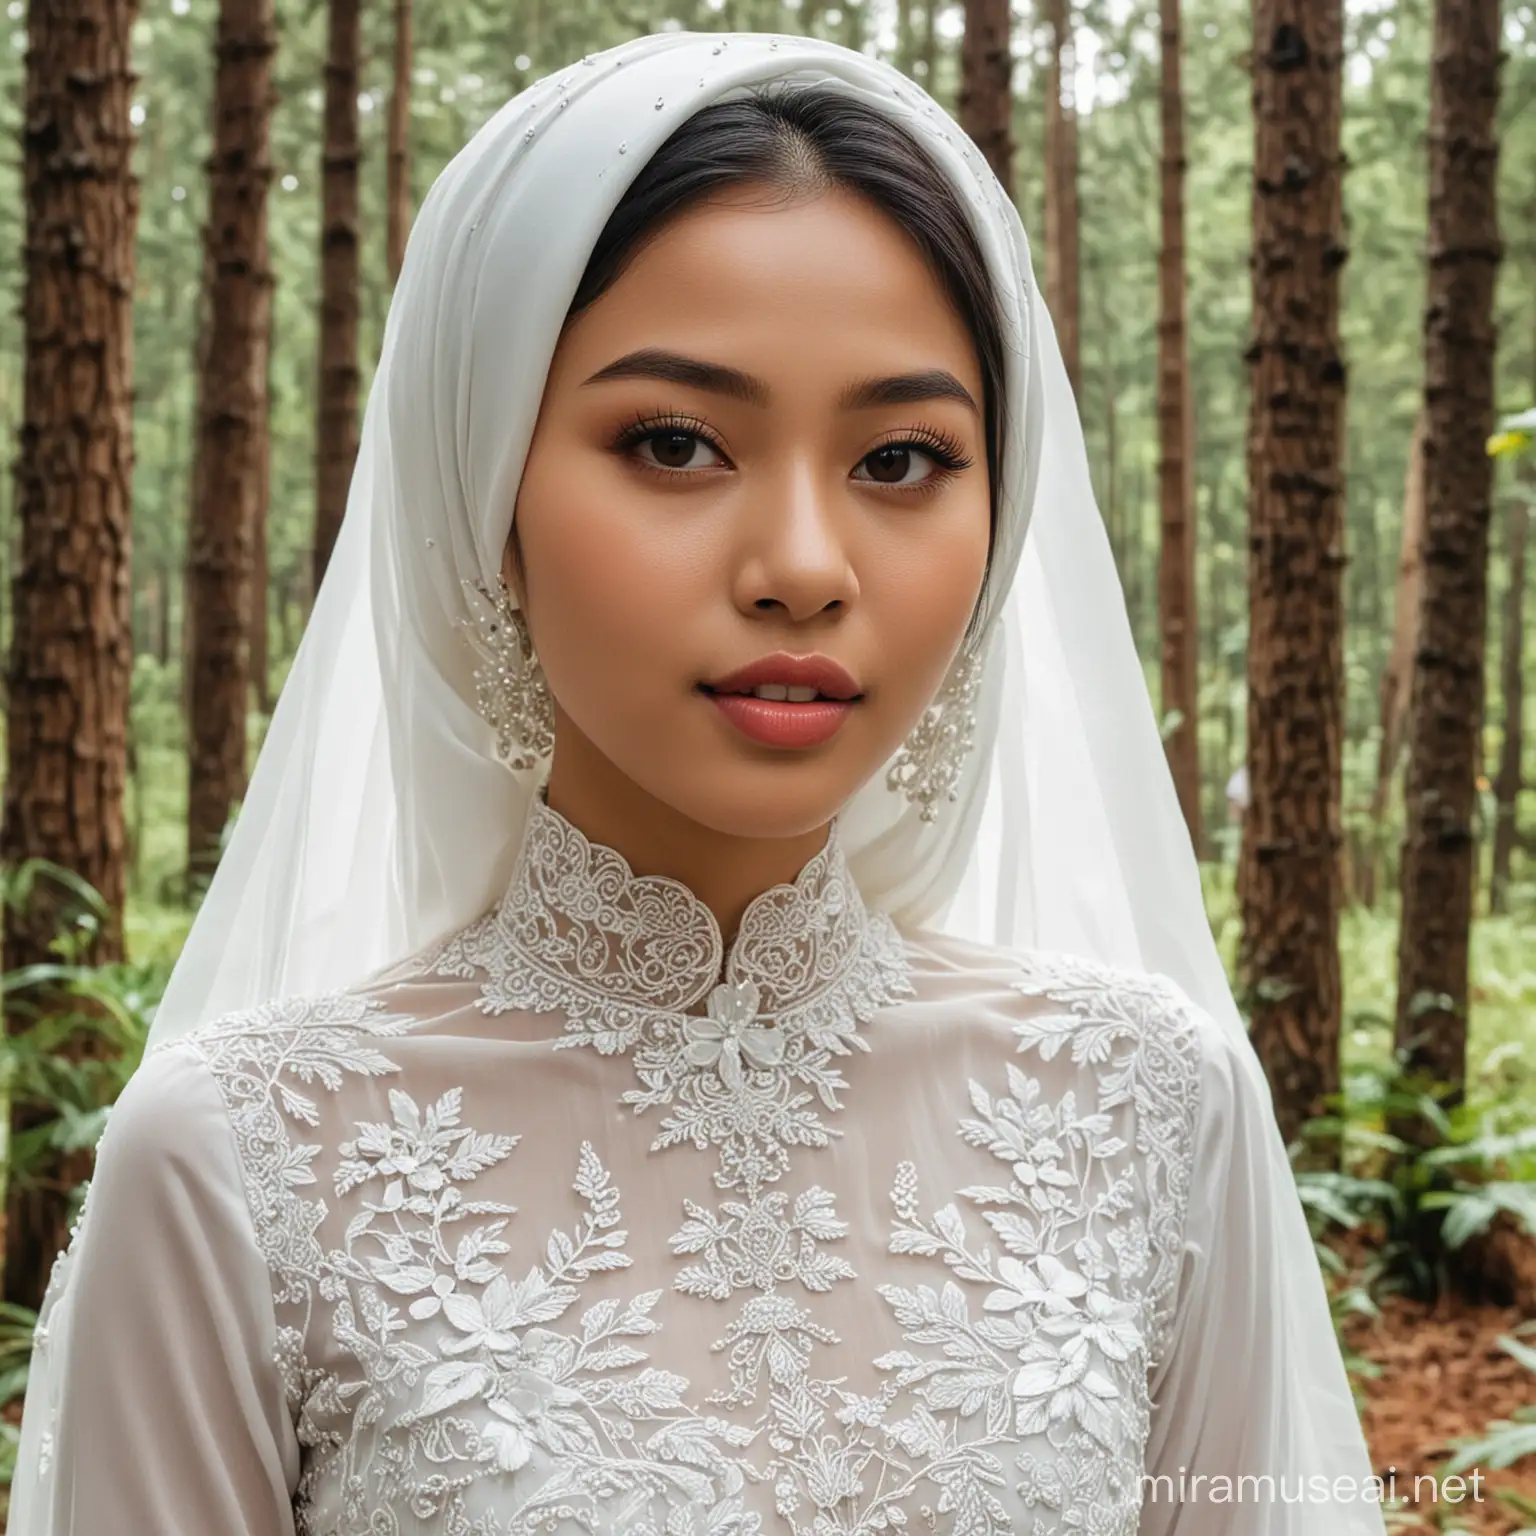 A 19 year old Indonesian celebrity woman, slightly reddish lips, wearing a luxurious white wedding dress with Sundanese customs and a white hijab, standing, with a pine forest in the background.